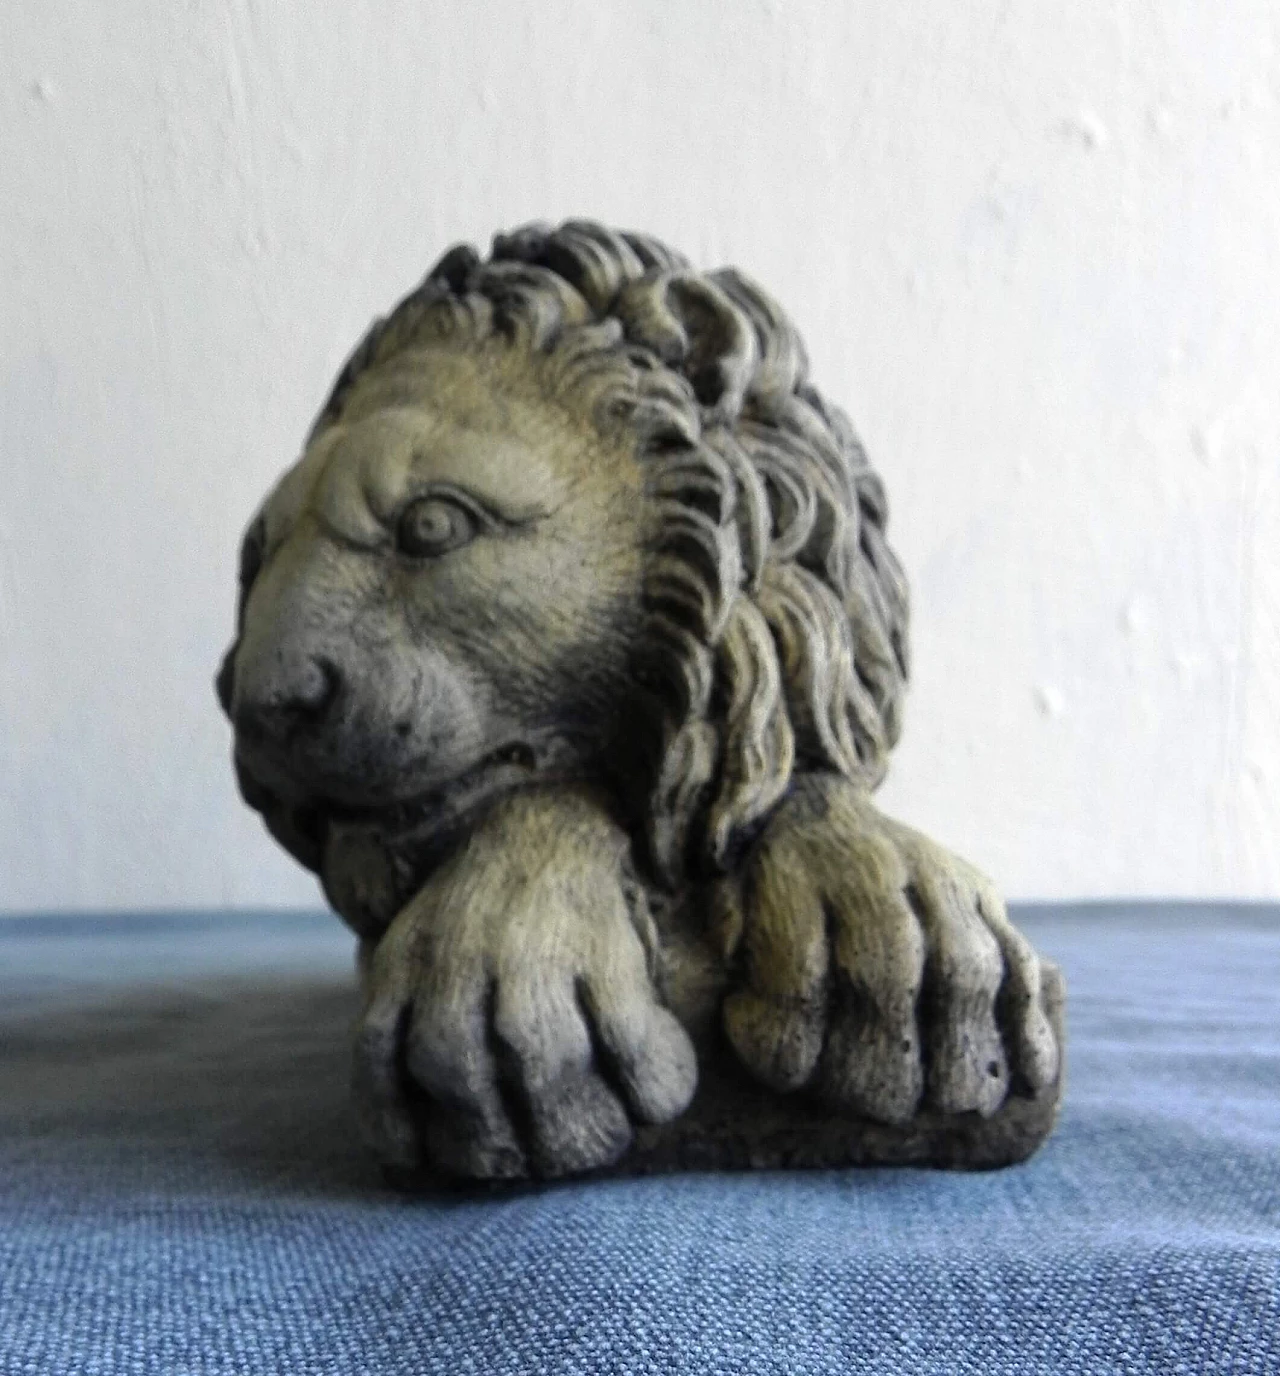 Pair of stone sculptures of sleeping lions 7